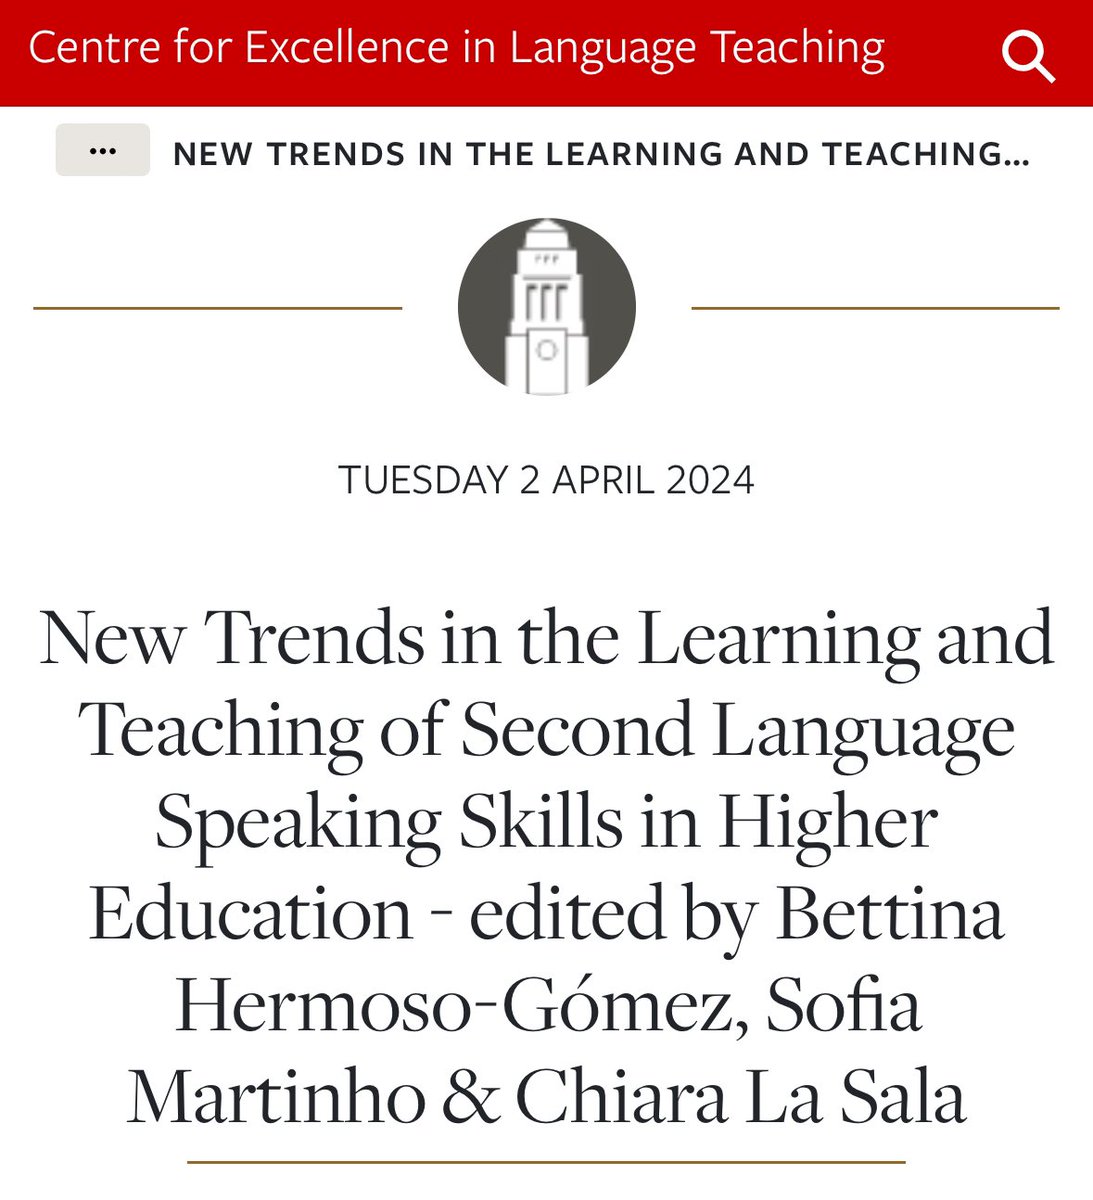 Congratulations to @bttnhg, @sofiarmartinho and Chiara La Sala, the editors of an innovative new book “New Trends in the Learning and Teaching of Second Language Speaking Skills in Higher Education“ just published with @CamScholars! celt.leeds.ac.uk/news/new-trend…